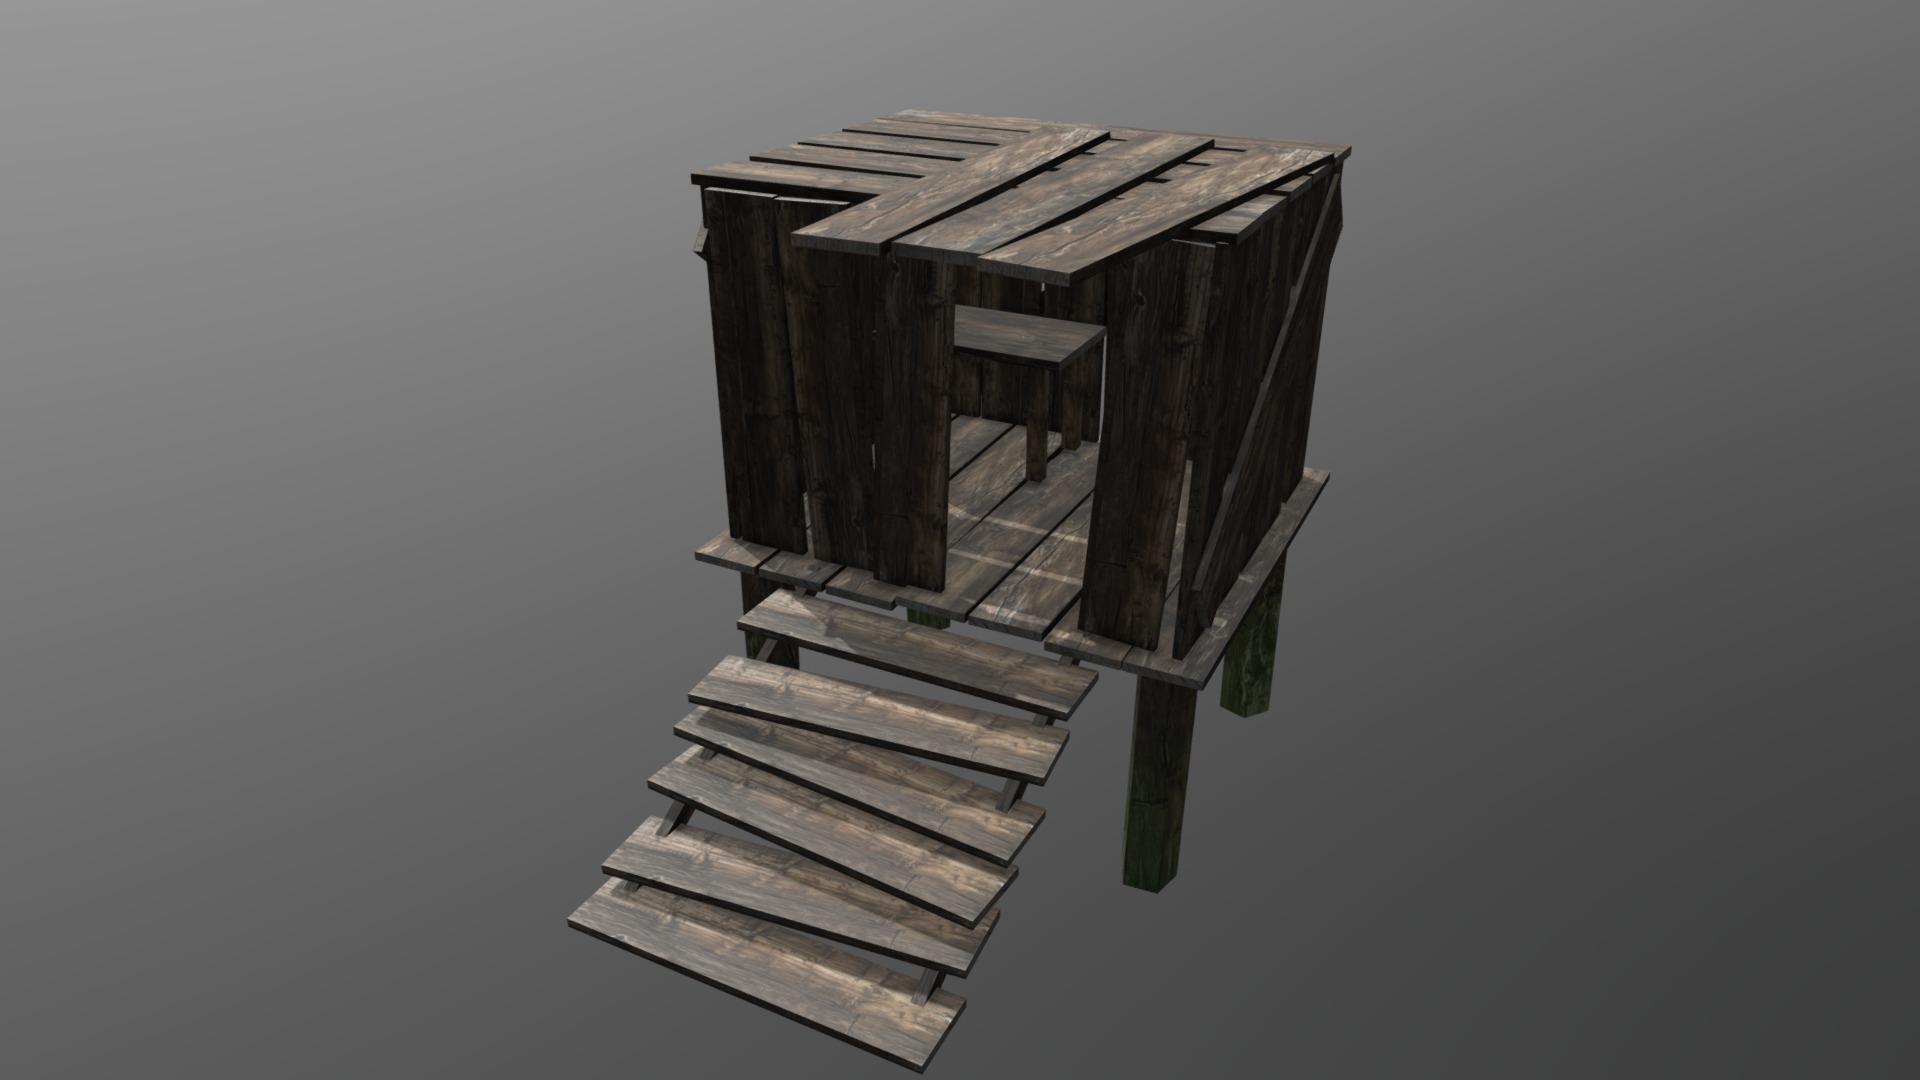 Made for my personal project playable level in Unity - Shack swamp - 3D model by Luca97 (@LucaTrollo97) 3d model